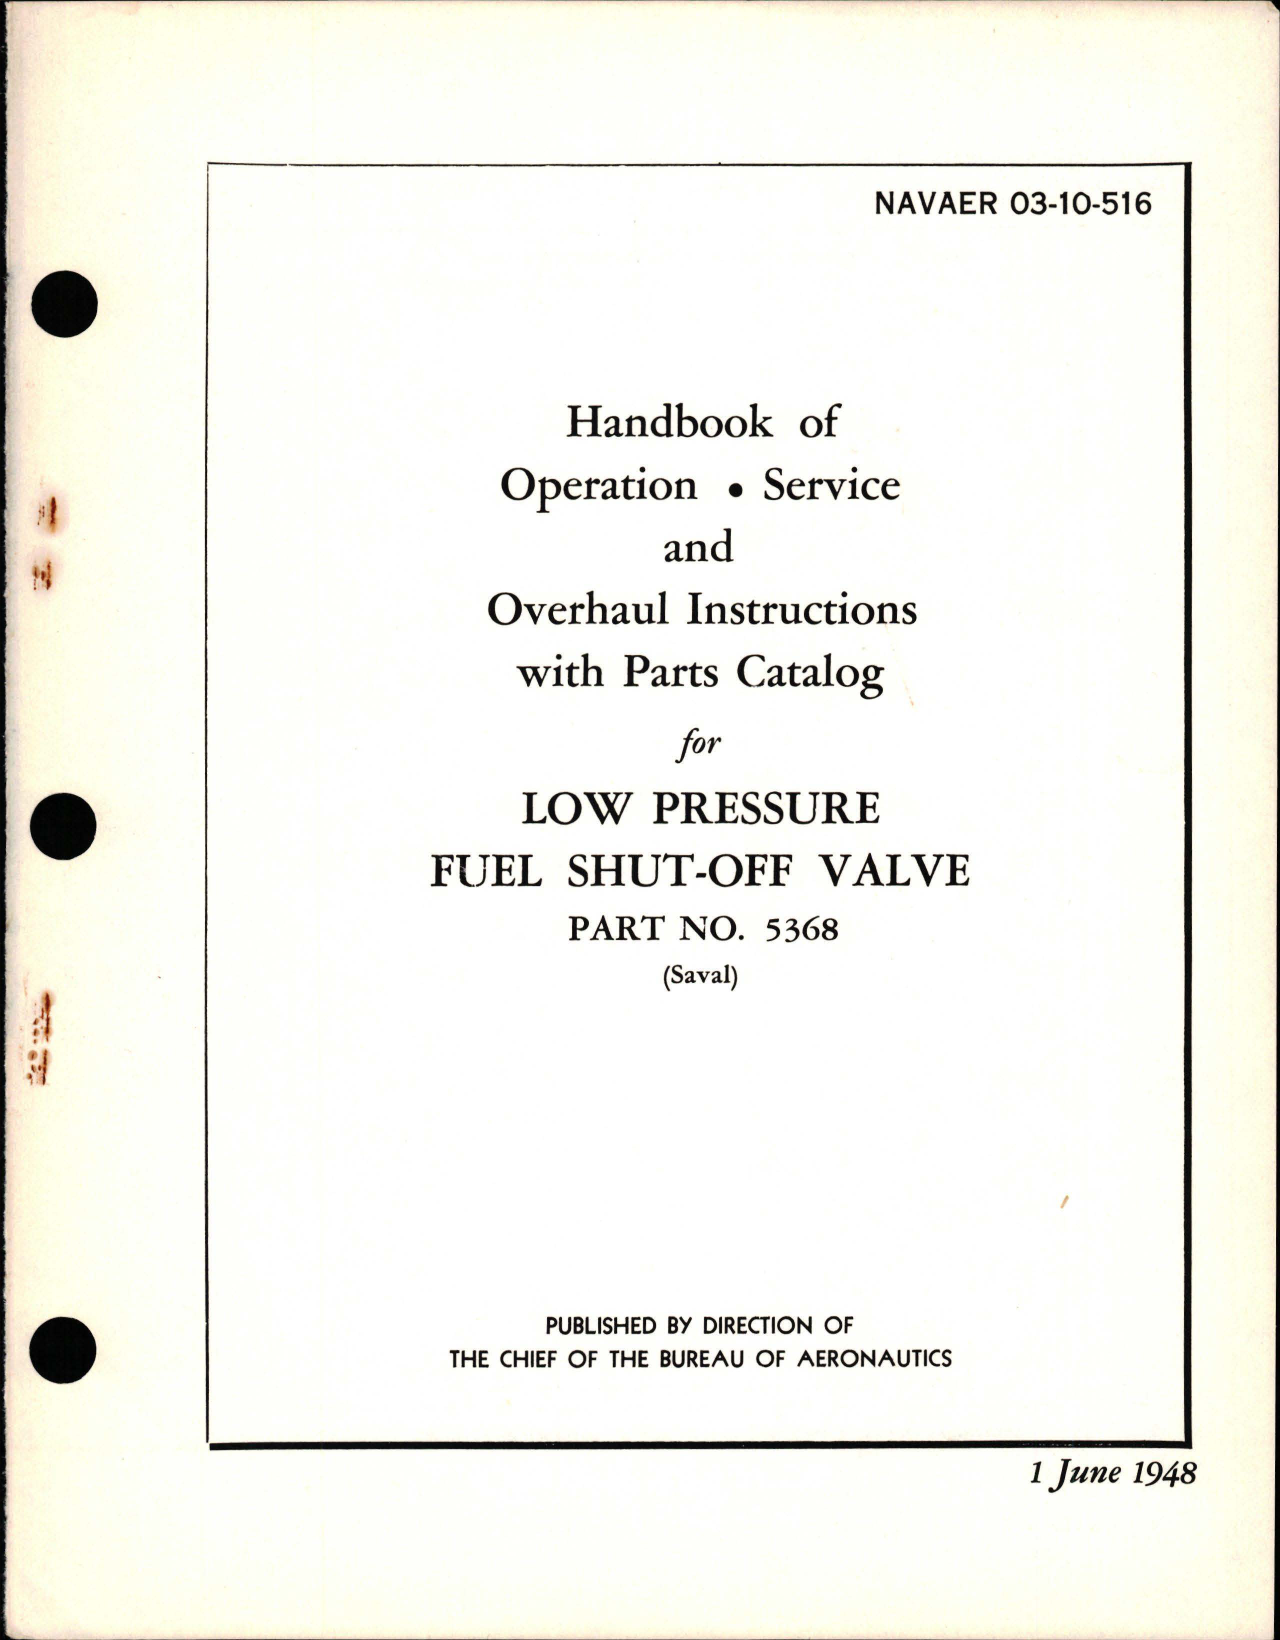 Sample page 1 from AirCorps Library document: Operation, Service, Overhaul Instructions and Parts Catalog for Low Pressure Fuel Shut-Off Valve - Part 5368